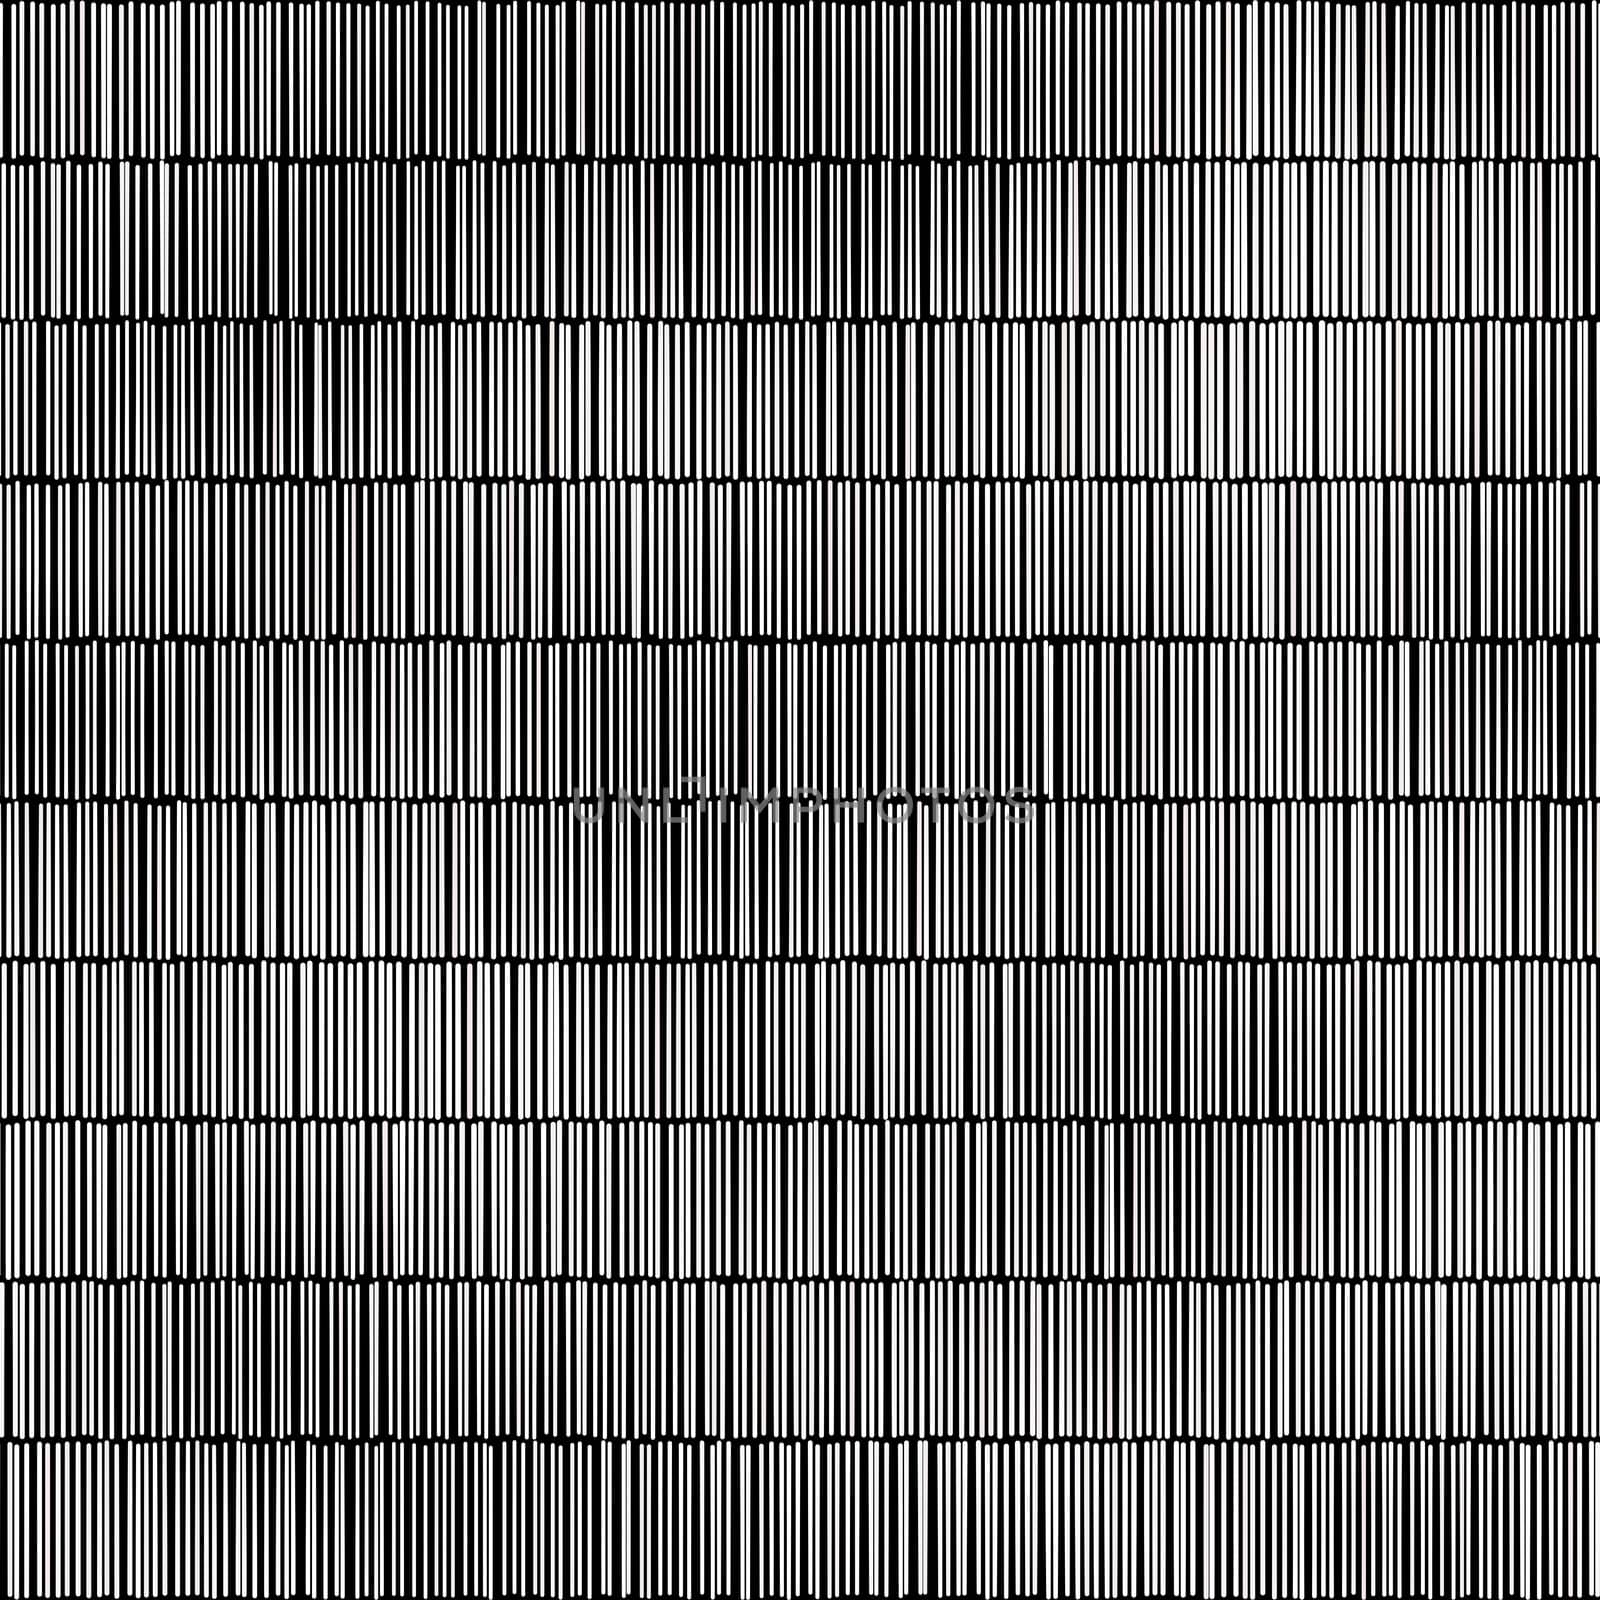 abstract black and white background texture by magann